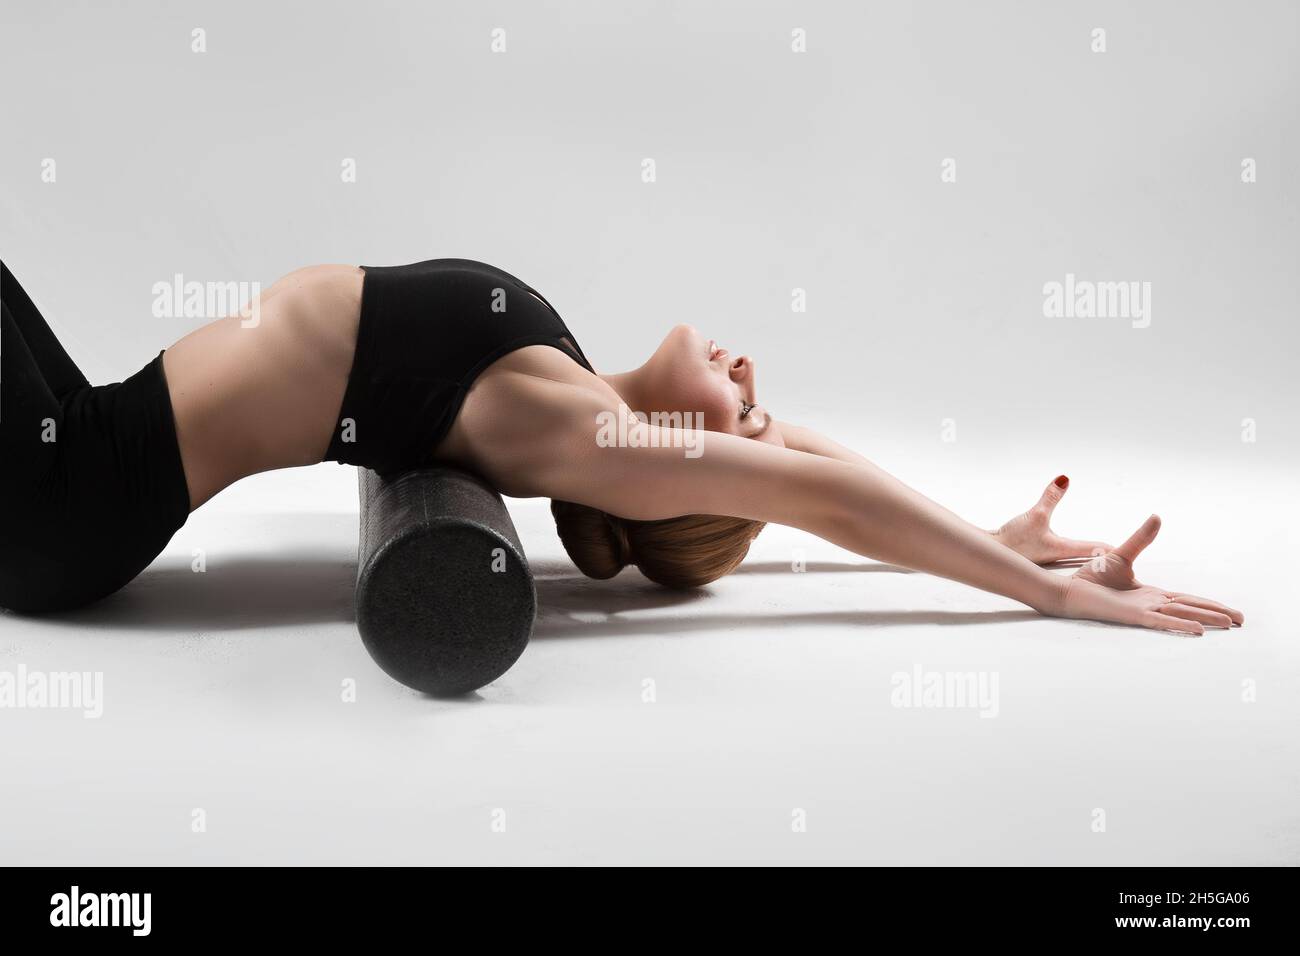 A professional yoga and pilates trainer shows exercises from yoga, pilates, stretching and other types of fitness on a mat with equipment, with fitnes Stock Photo